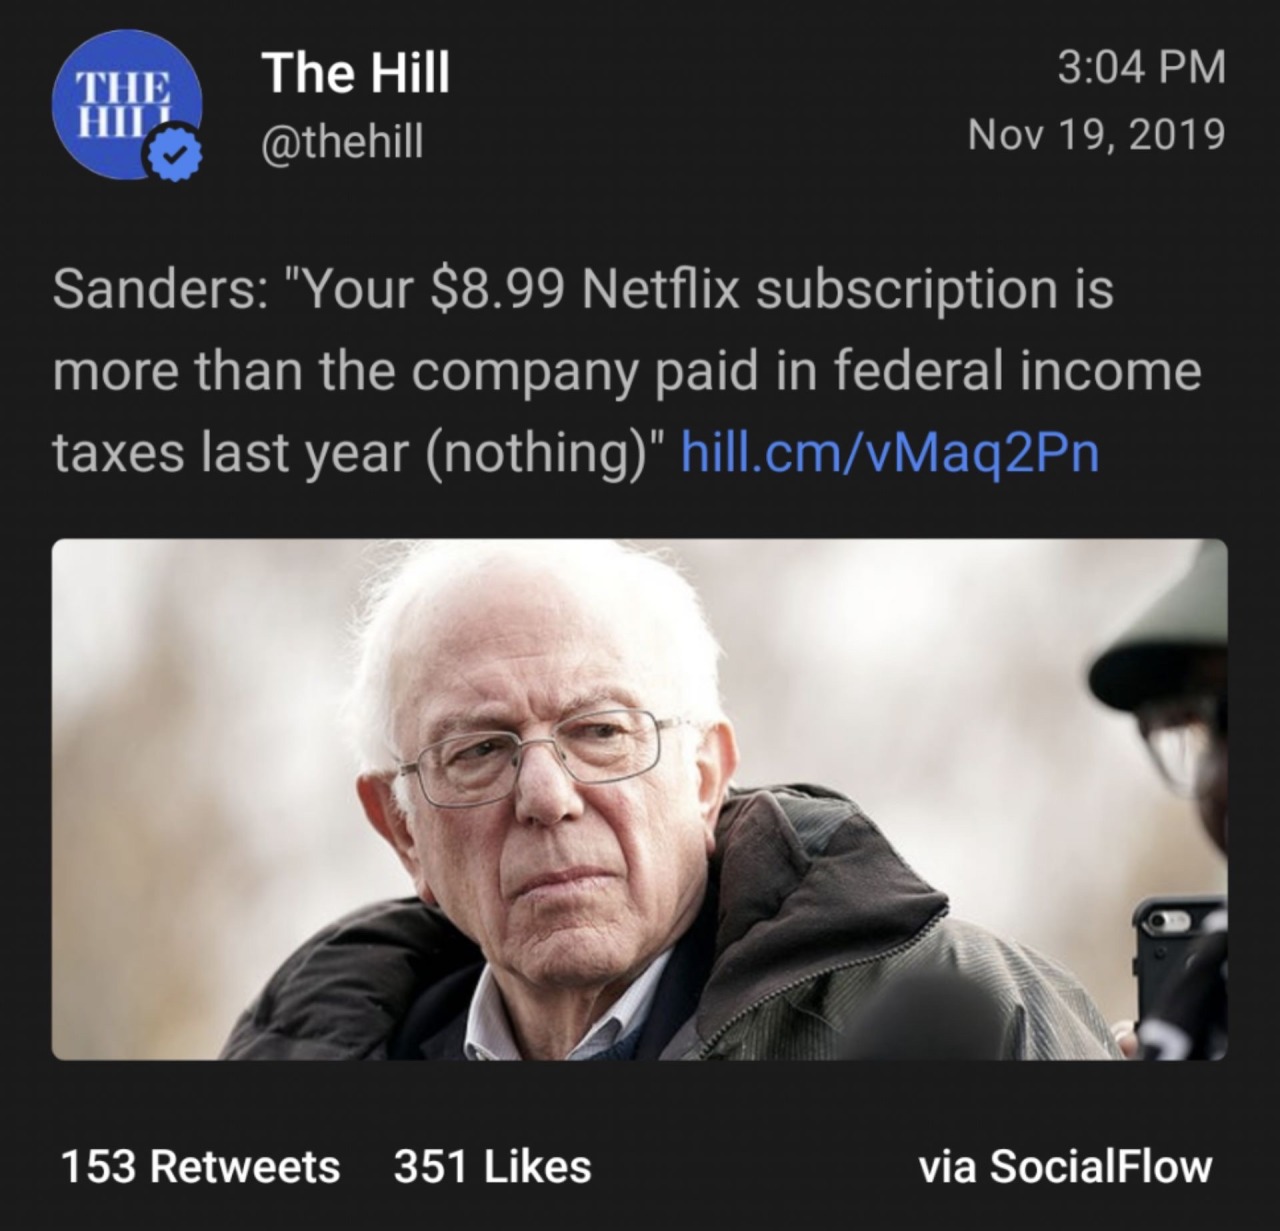 photo caption - The The Hill Hii Sanders "Your $8.99 Netflix subscription is more than the company paid in federal income taxes last year nothing" hill.cmvMaq2Pn 153 351 via SocialFlow